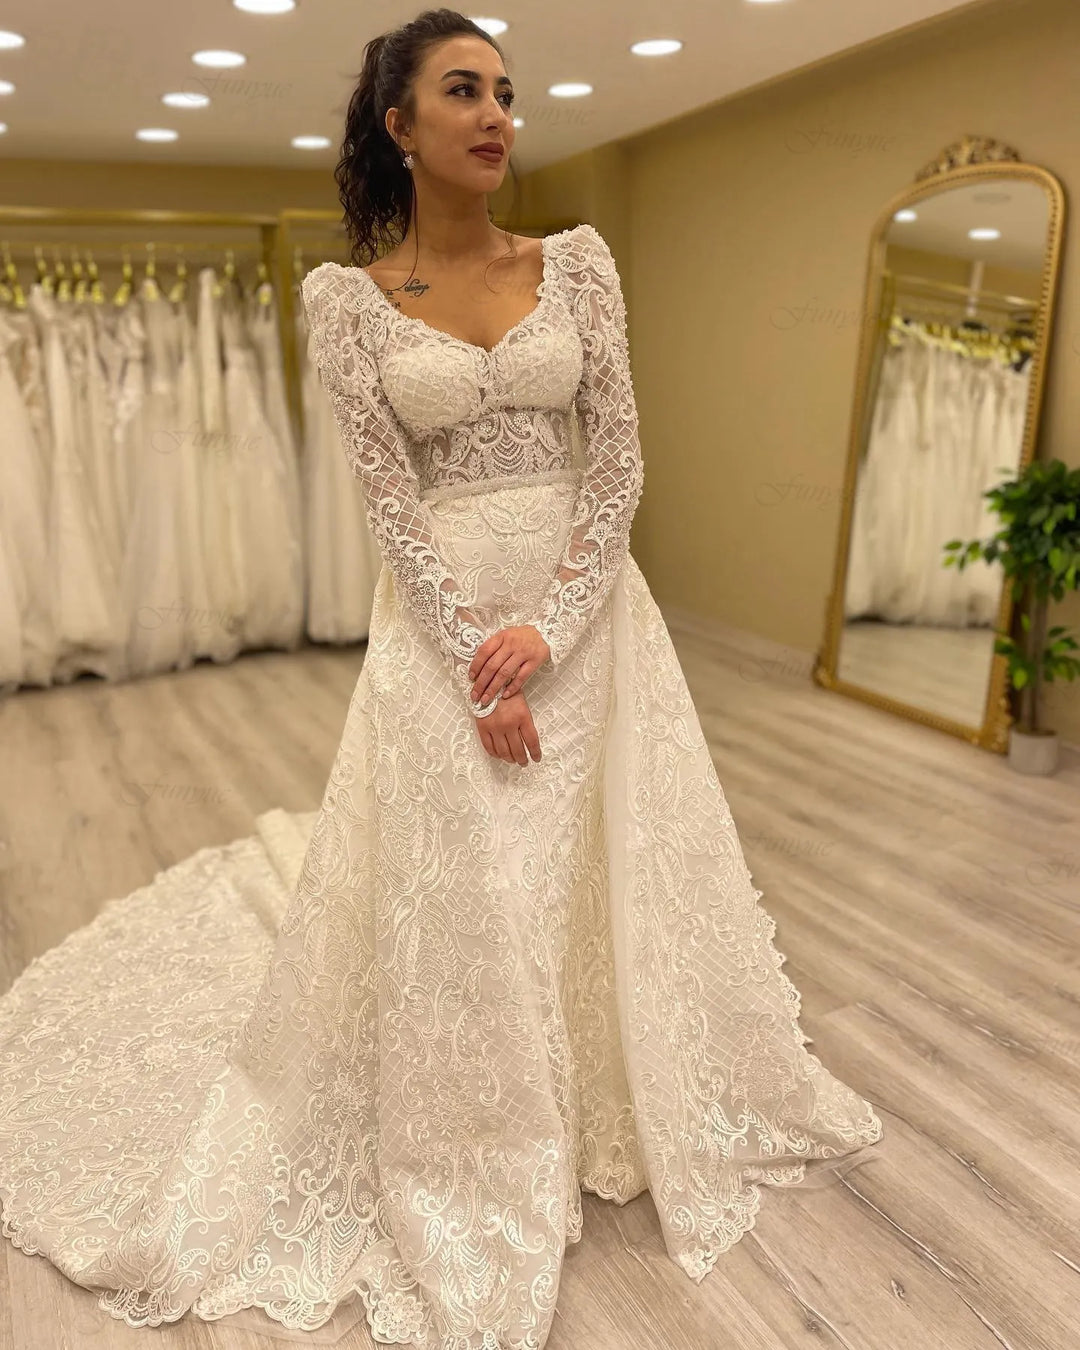 Luxury Beading Arabian Bride Gown| All For Me Today